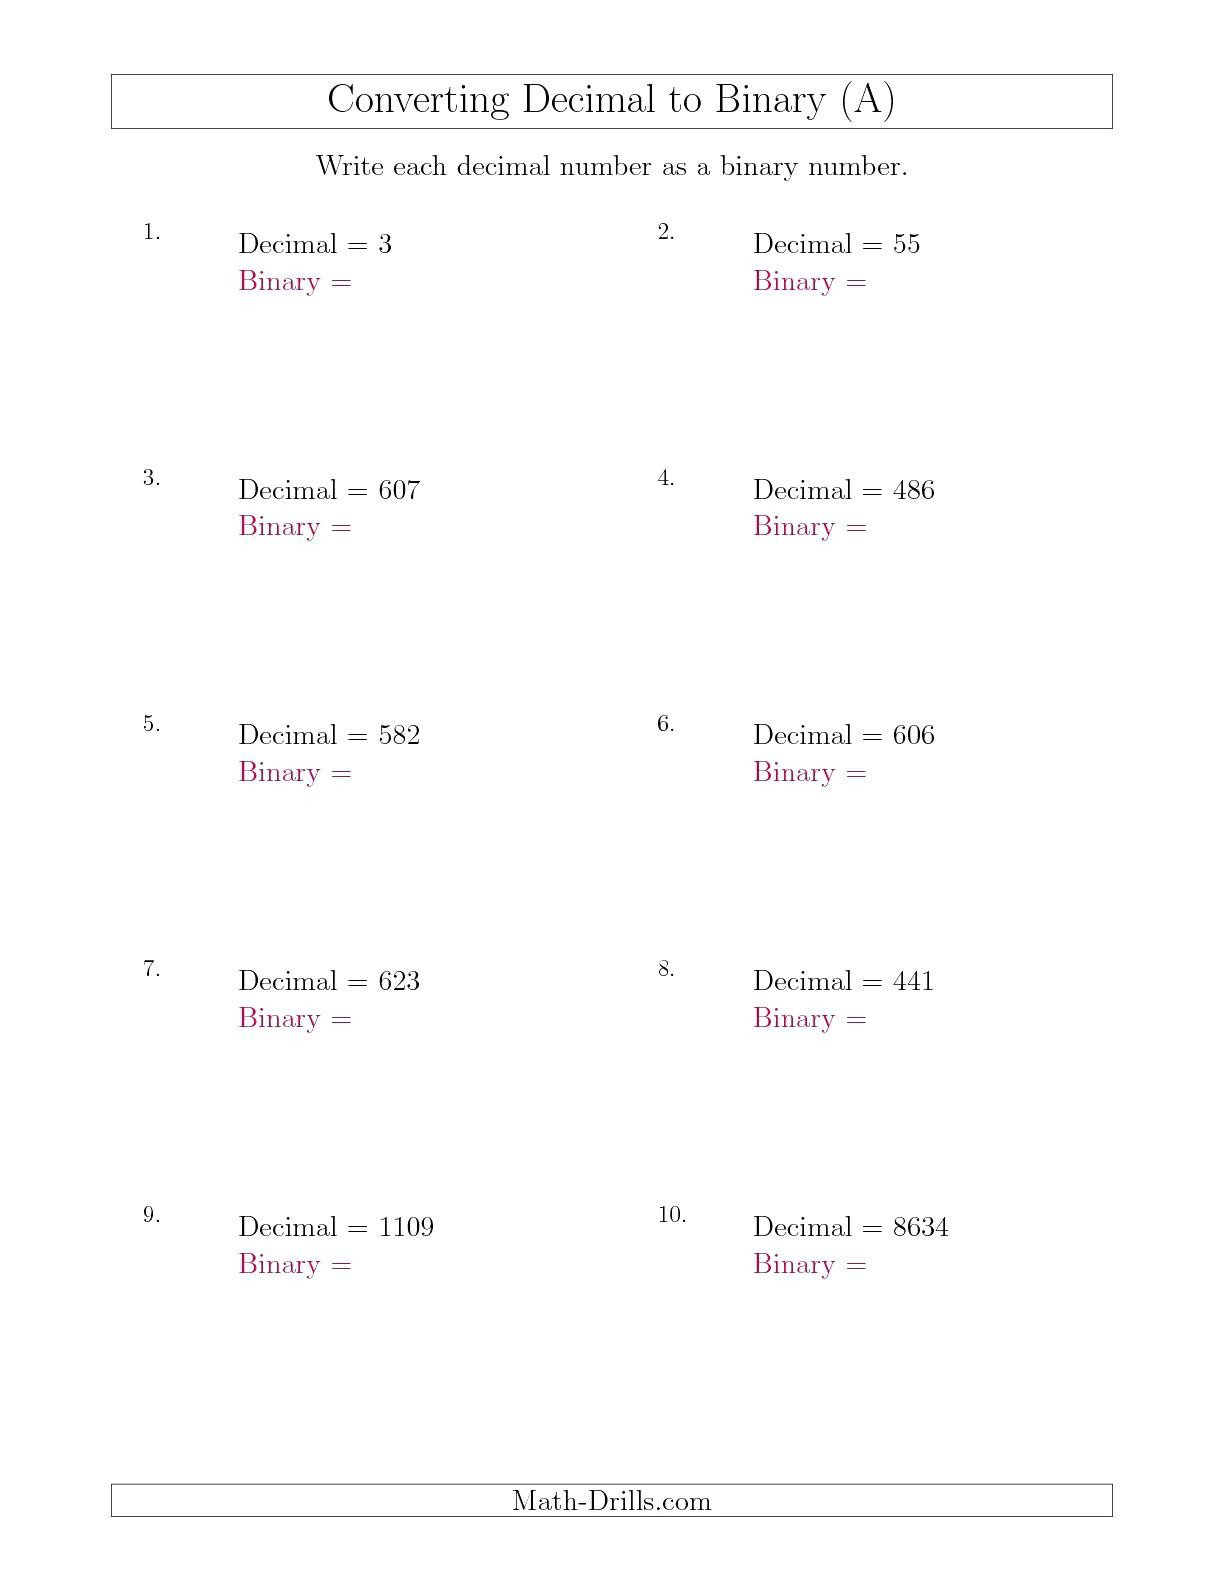 Repeating Decimals to Fractions Worksheet Decimals and Fractions Worksheets Converting Recurring